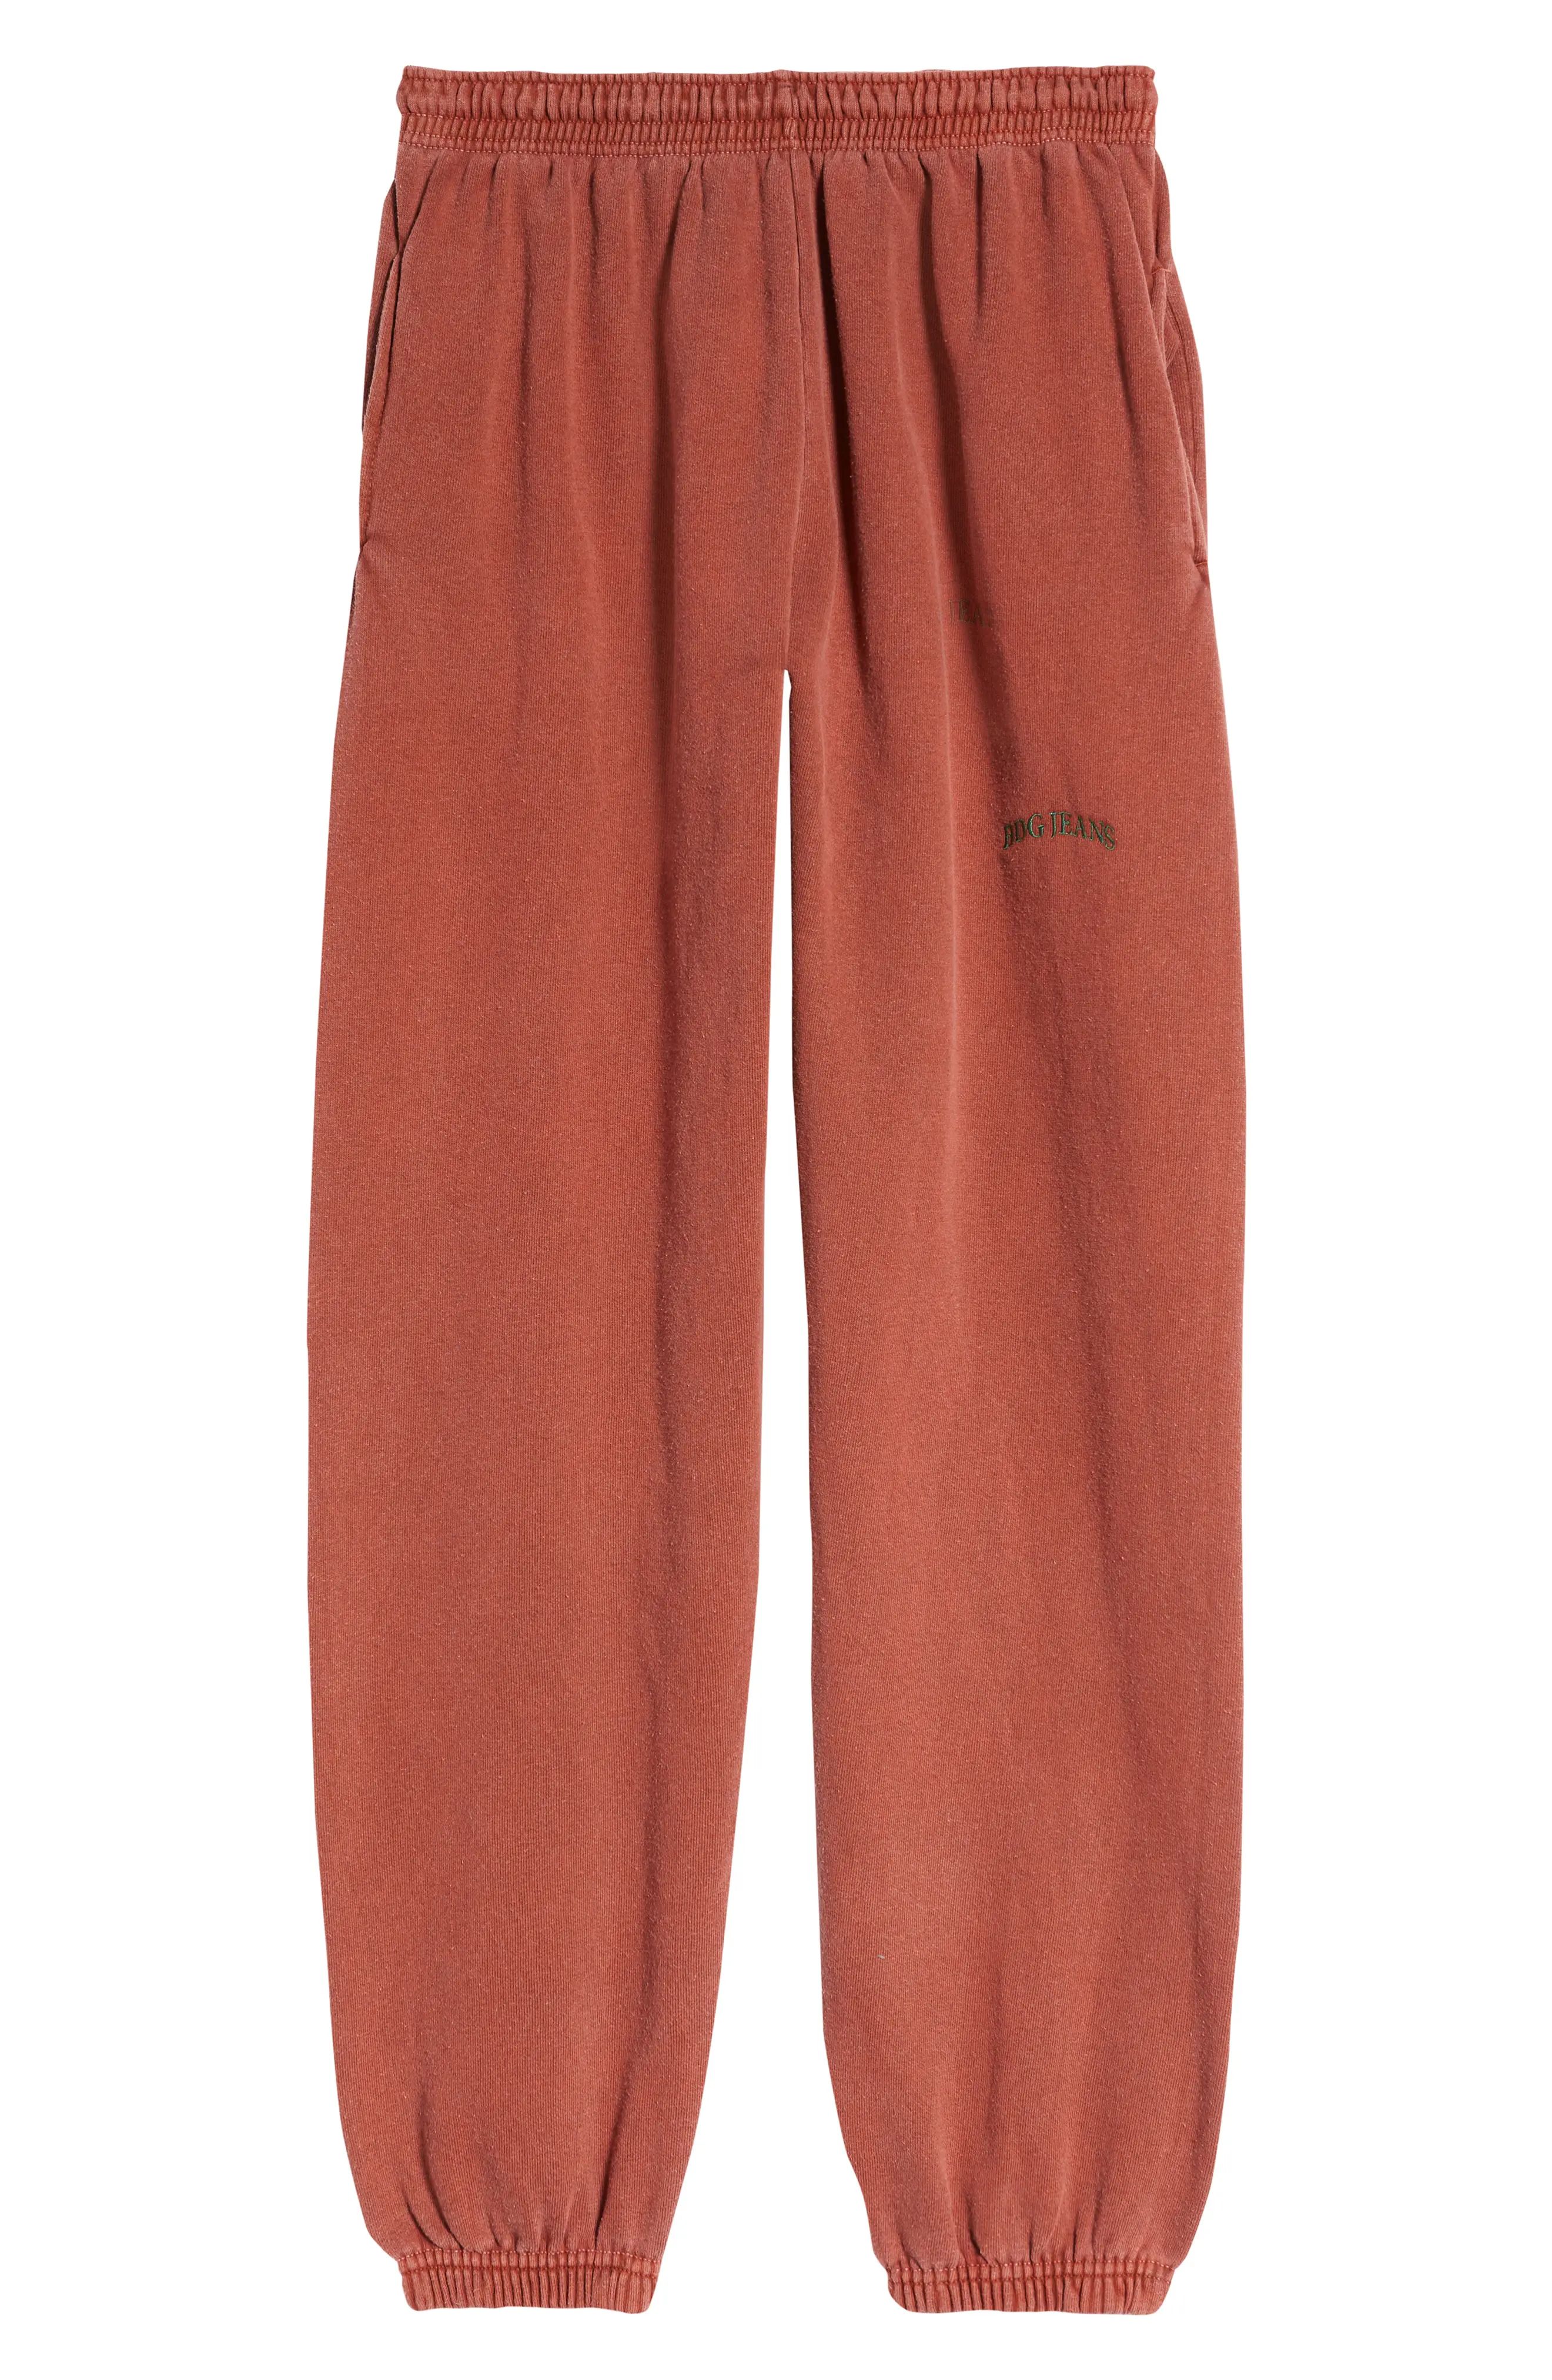 BDG Urban Outfitters Men's Joggers in Rust at Nordstrom, Size Small | Nordstrom